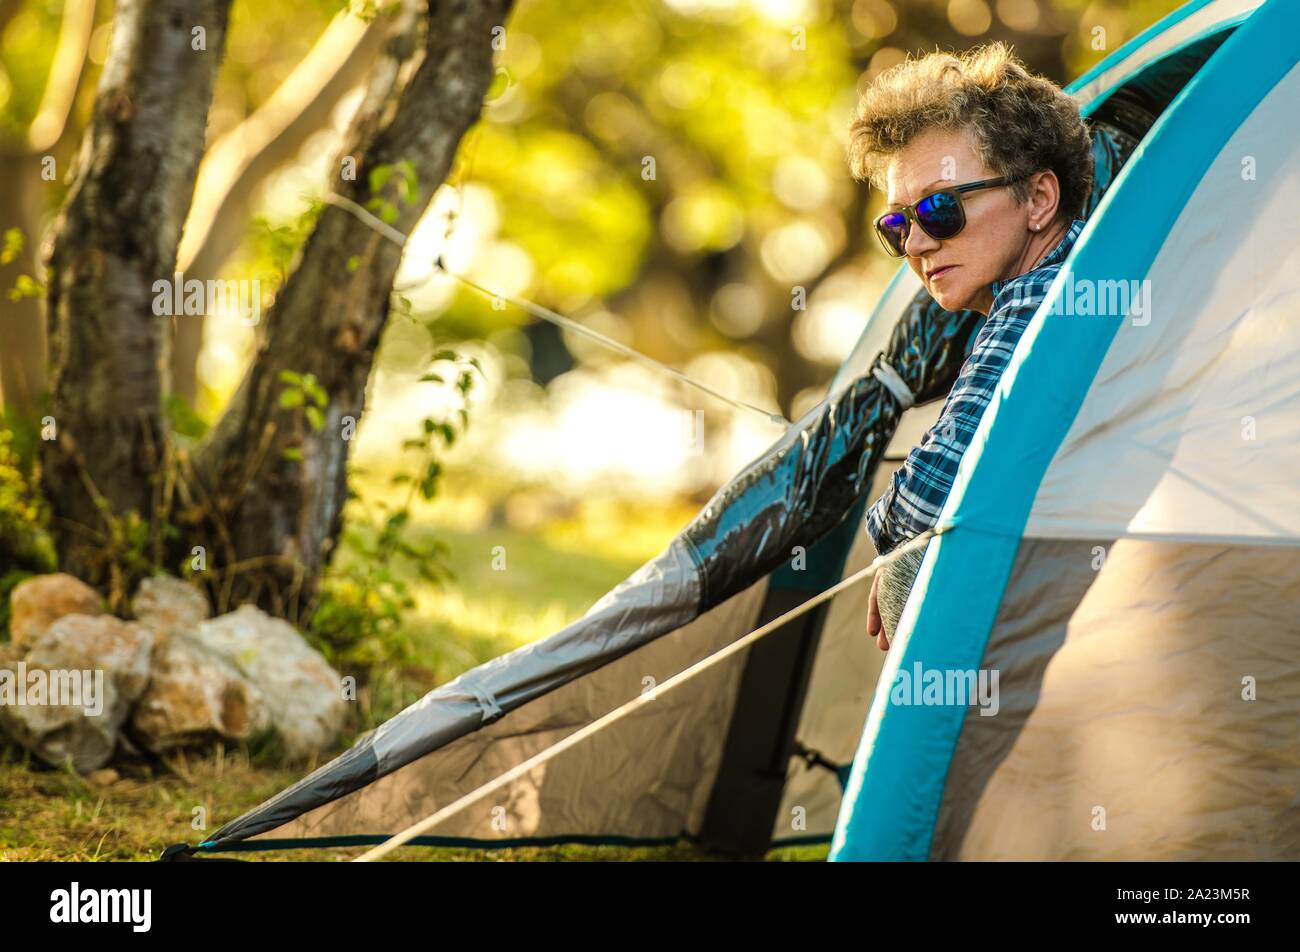 Senior Woman Tent Camping. Caucasian Retired Woman in Her 60s Looking Outside From Her Tent. Campground Pitch. Summer Vacation. Stock Photo